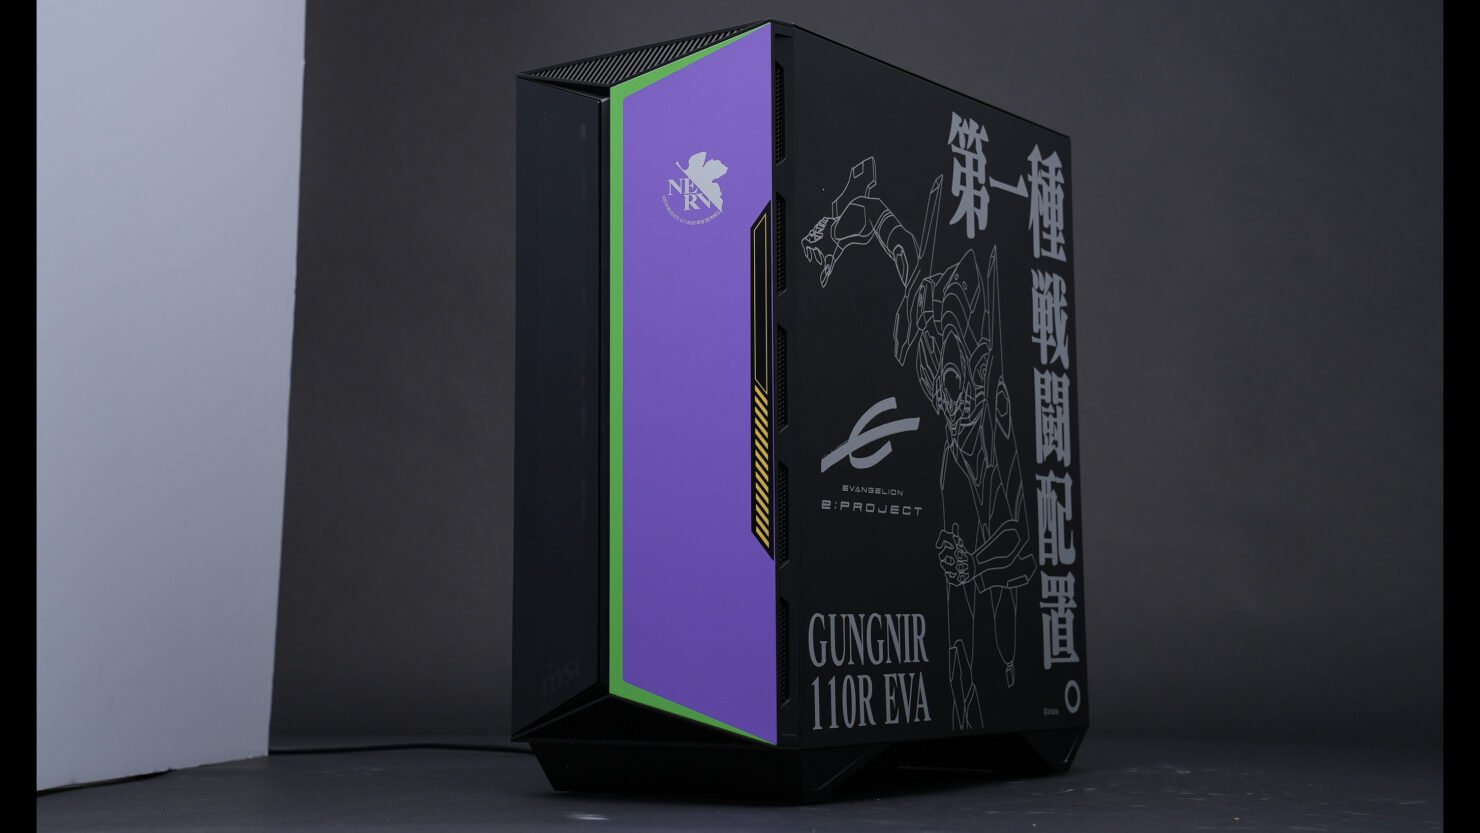 msi-unveils-neon-genesis-evangelion-anime-inspired-pc-components-cases-motherboards-psus-aio-coolers-_1